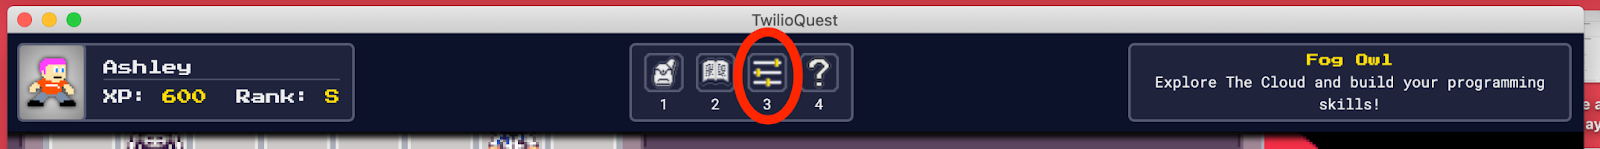 Screenshot showing the top menu bar of the TwilioQuest game, with the icon representing the settings button circled in red.